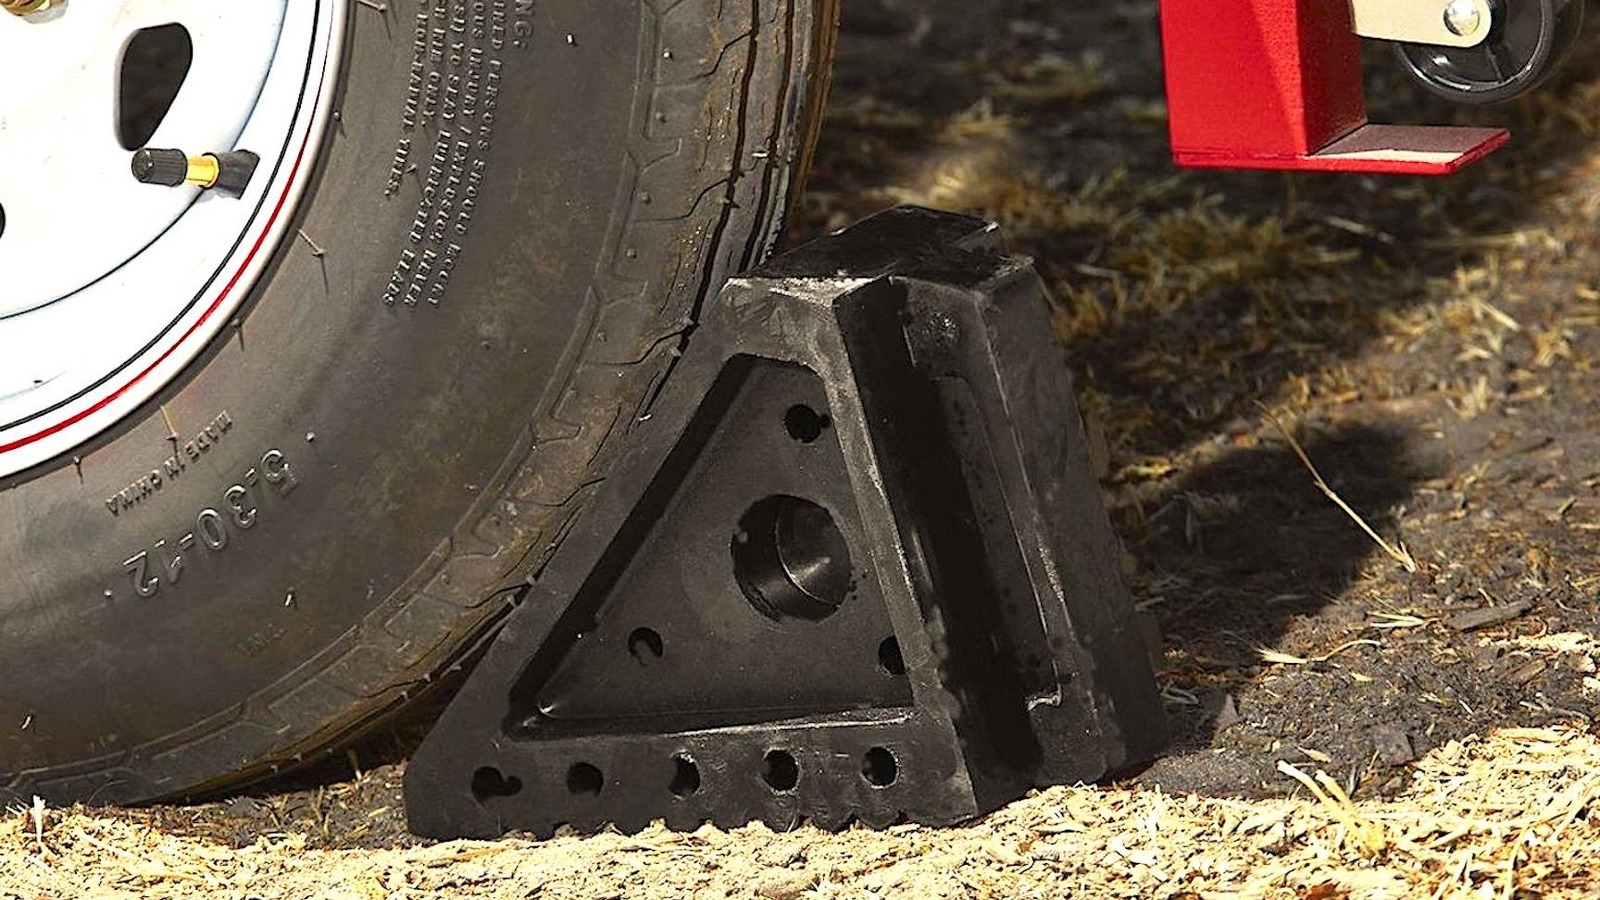 Harbor Freight Wheel Chocks: What Do They Cost & Are Rubber Or Plastic Ones Better?